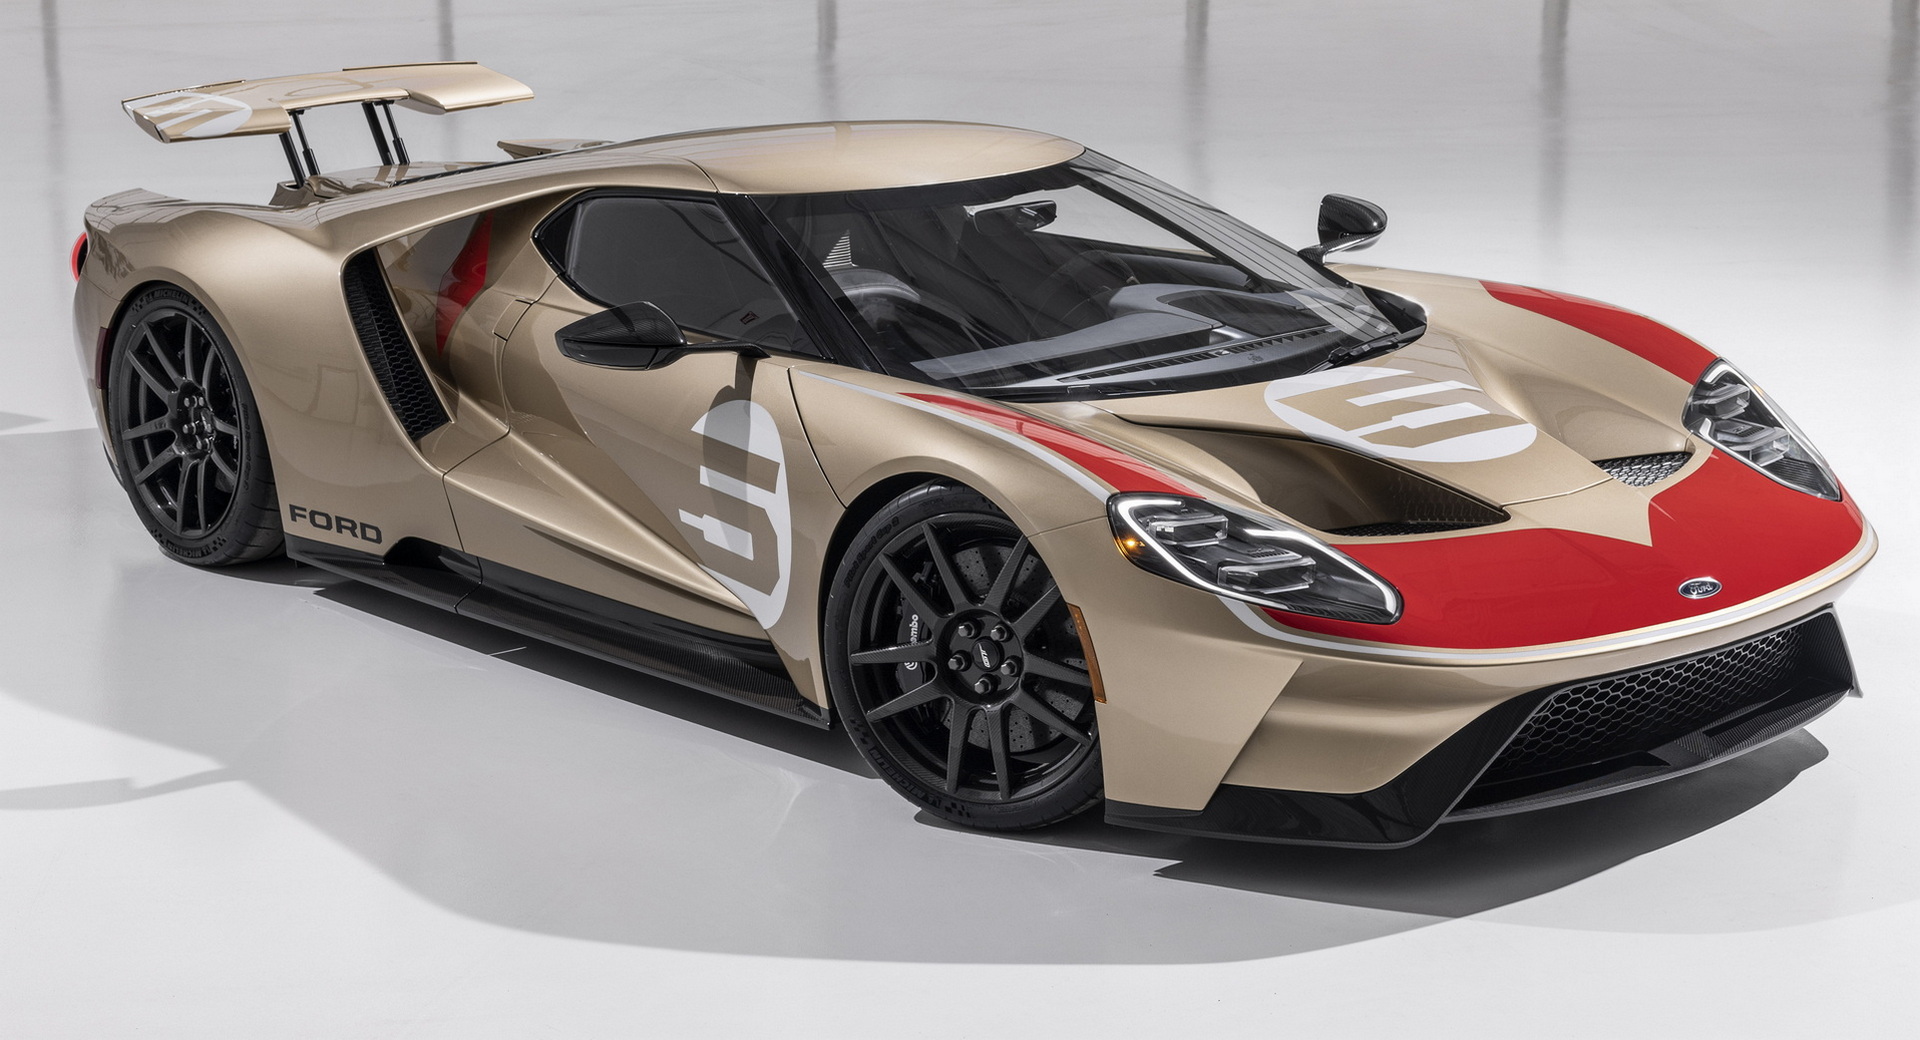 Ford Bringing New Heritage Edition GT Celebrating Holman Moody To New